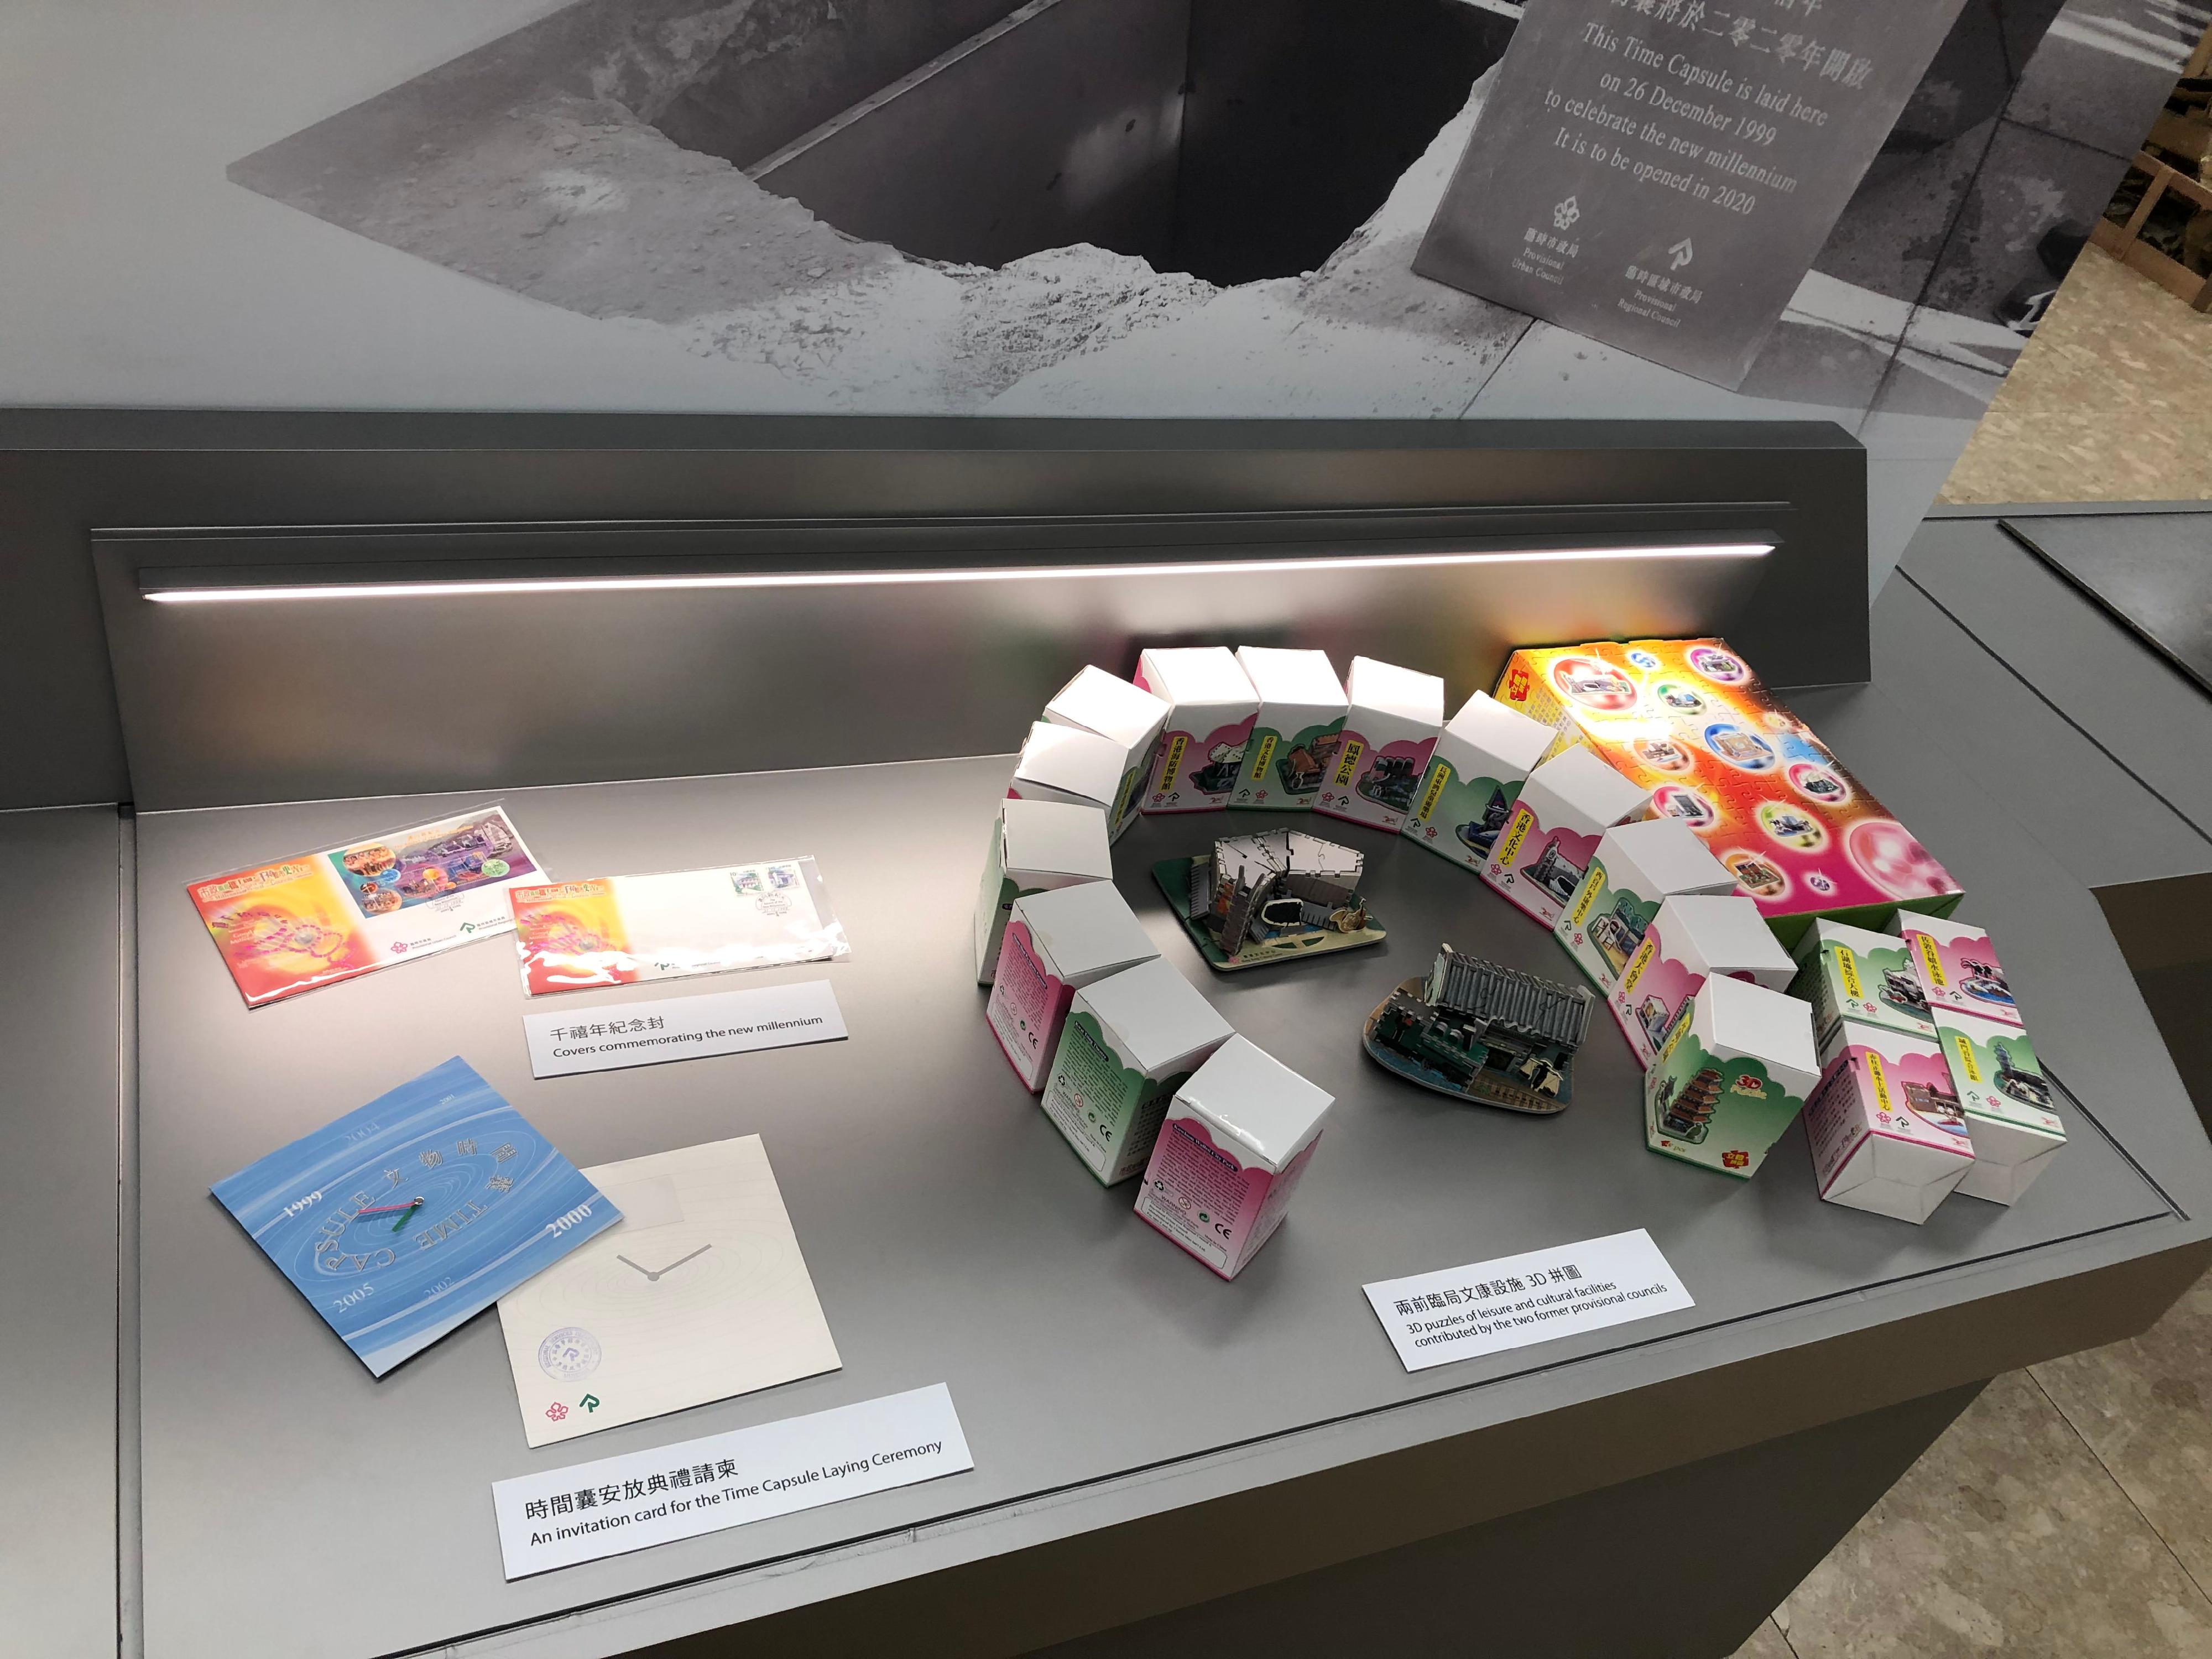 The Leisure and Cultural Services Department today (December 28) started to display at Tsuen Wan Town Hall the time capsule that was buried by the former Provisional Urban Council and the former Provisional Regional Council. Picture shows covers commemorating the new millennium (top left), an invitation card for the Time Capsule Laying Ceremony (bottom left), and the 3D puzzles of the Hong Kong Cultural Centre and the Hong Kong Railway Museum (right).